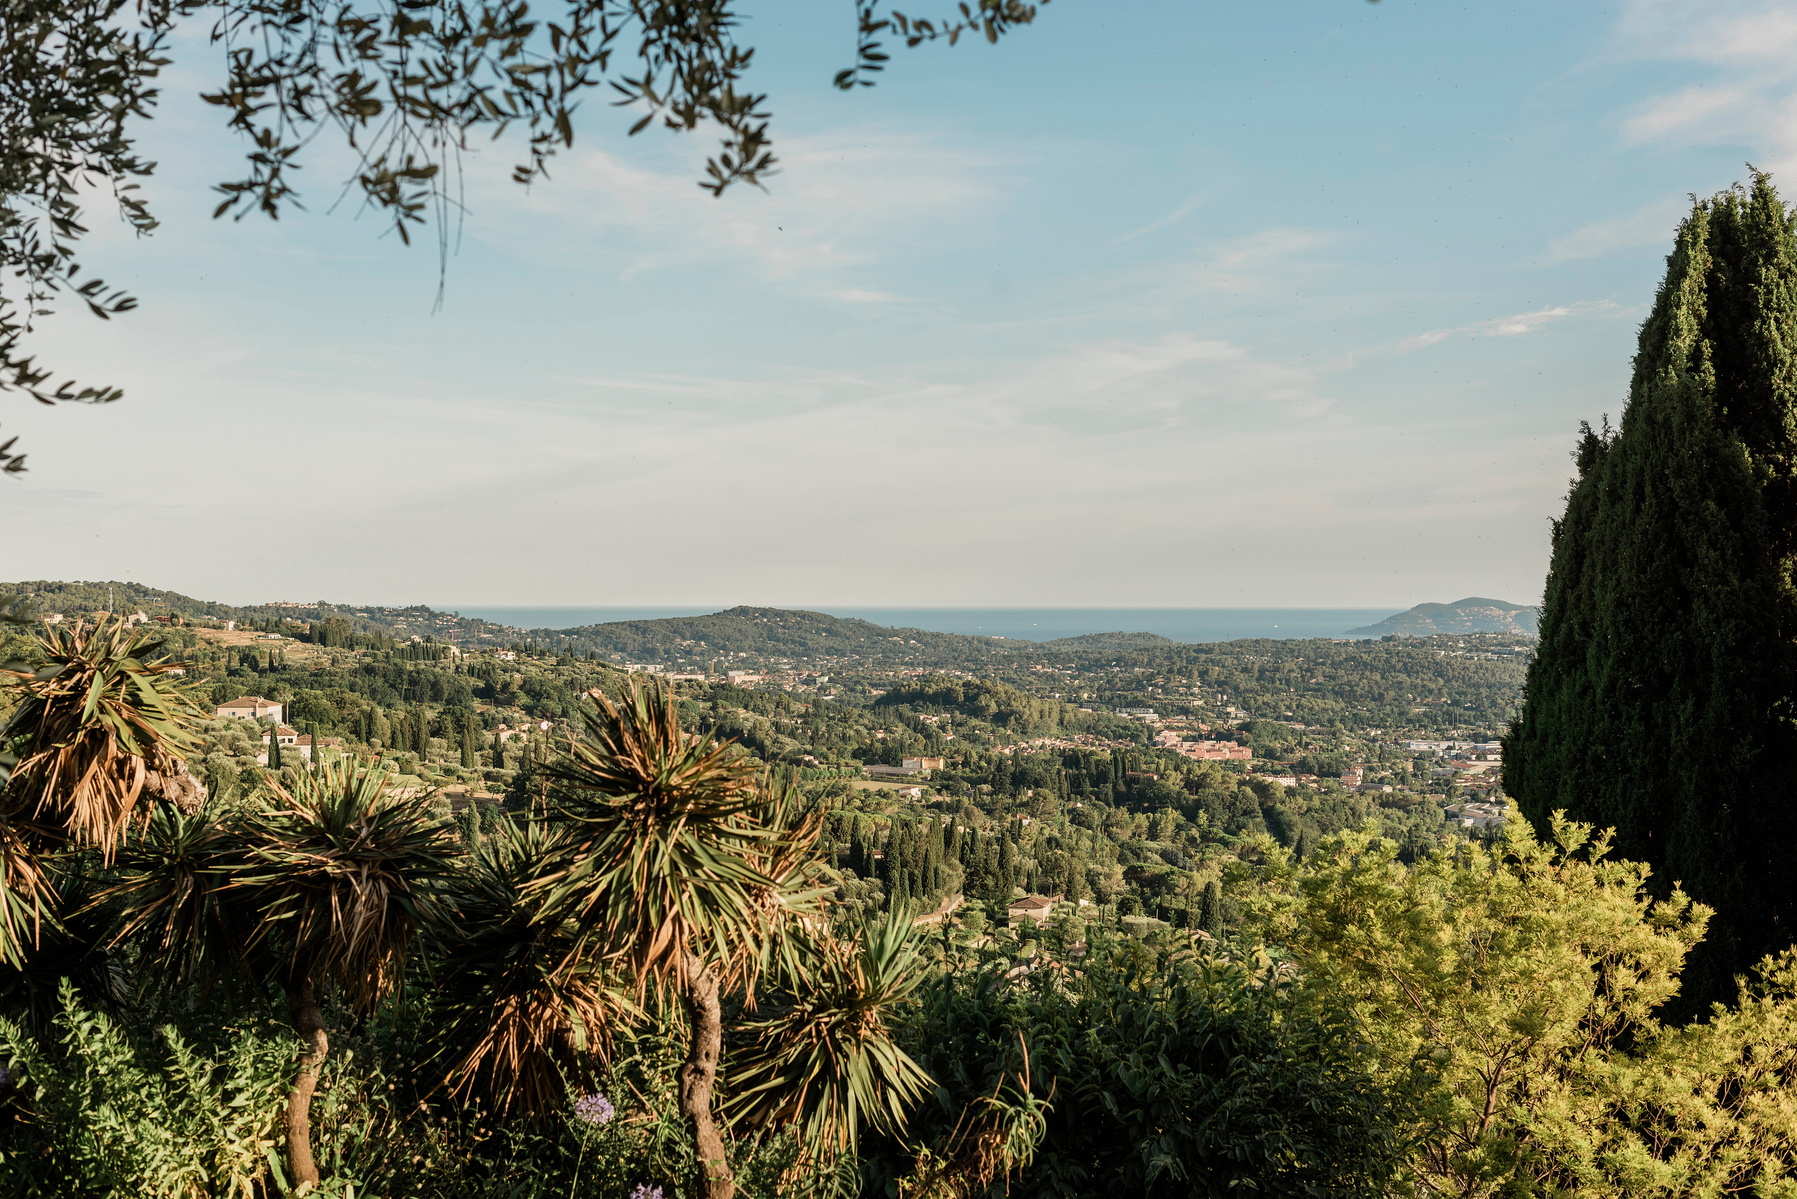 Bride and Groom at Mas Peyloubet wedding venue in Grasse, South of France. Wedding venue in the Provence with stunning views of the Cote d'Azur. French Riviera wedding photographer. 